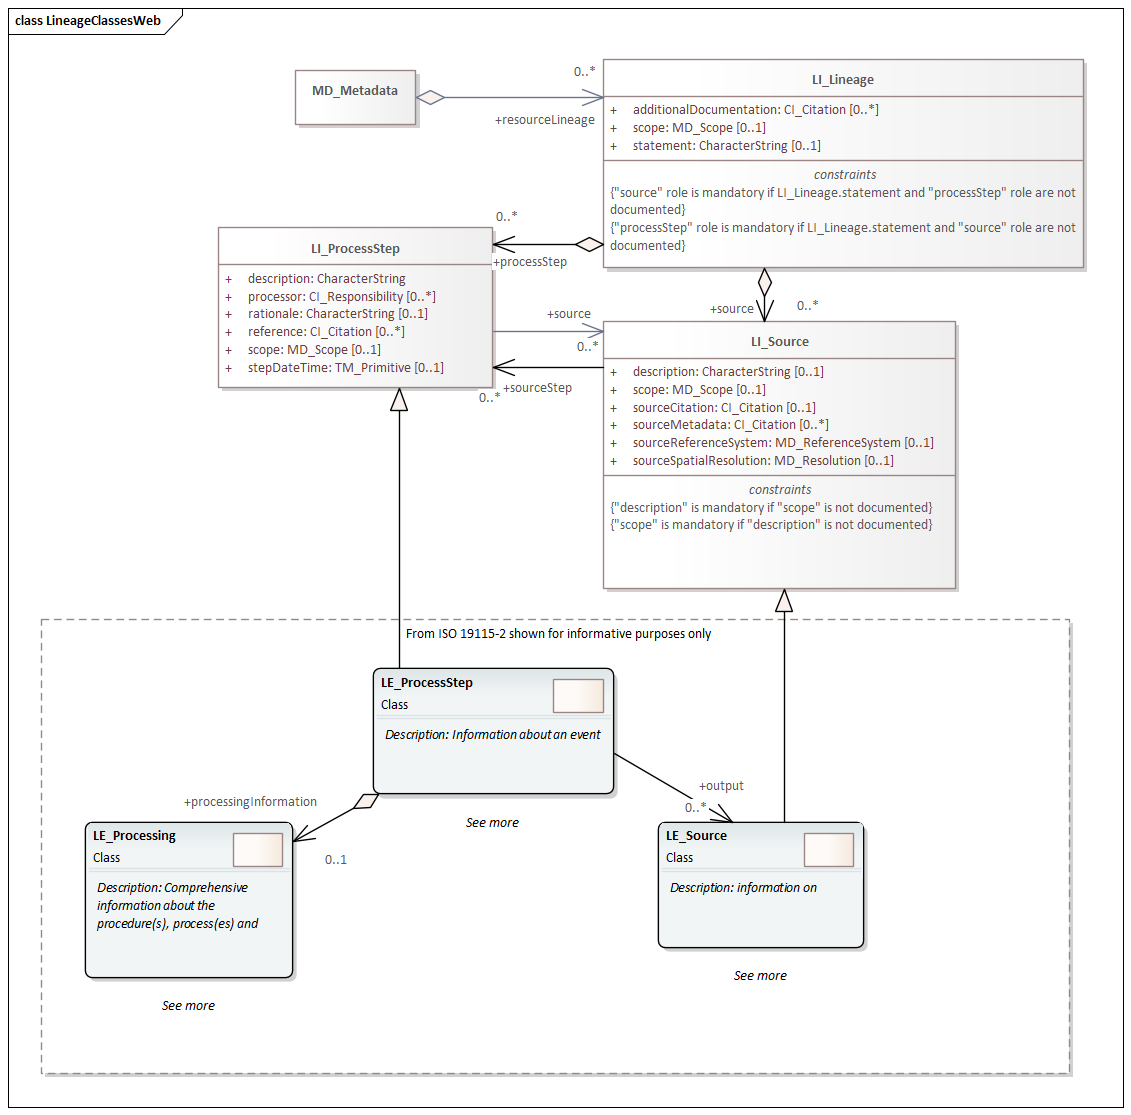 UML diagram of Metadata for Resource Lineage classes in the mrl namespace